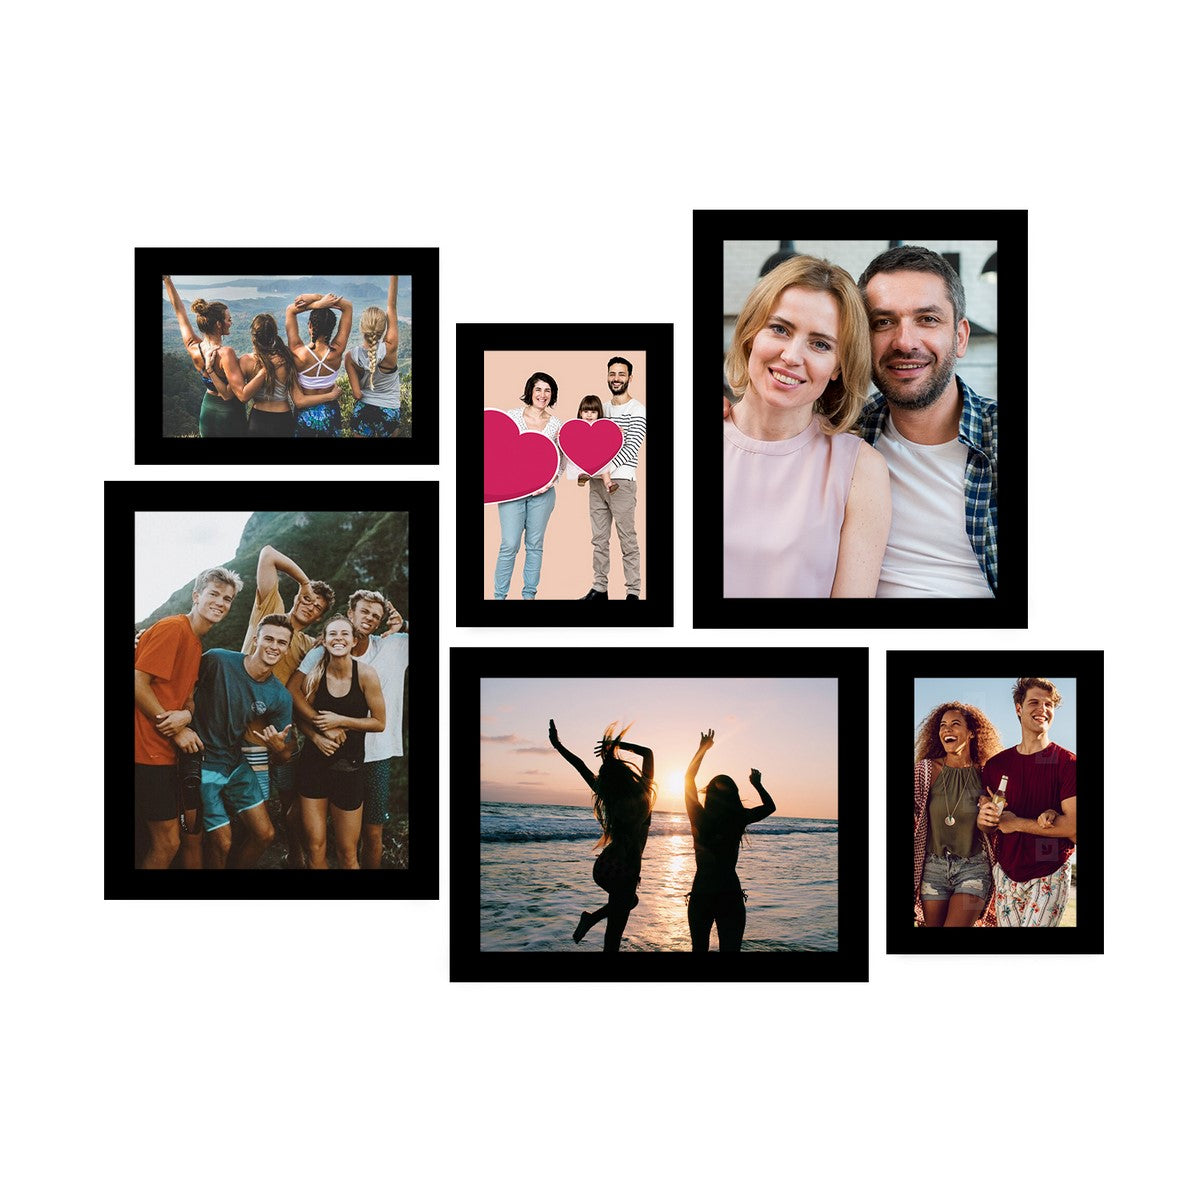 Memory Wall Collage Photo Frame - Set of 6 Photo Frames for 3 Photos of 5"x7", 3 Photos of 8"x10"